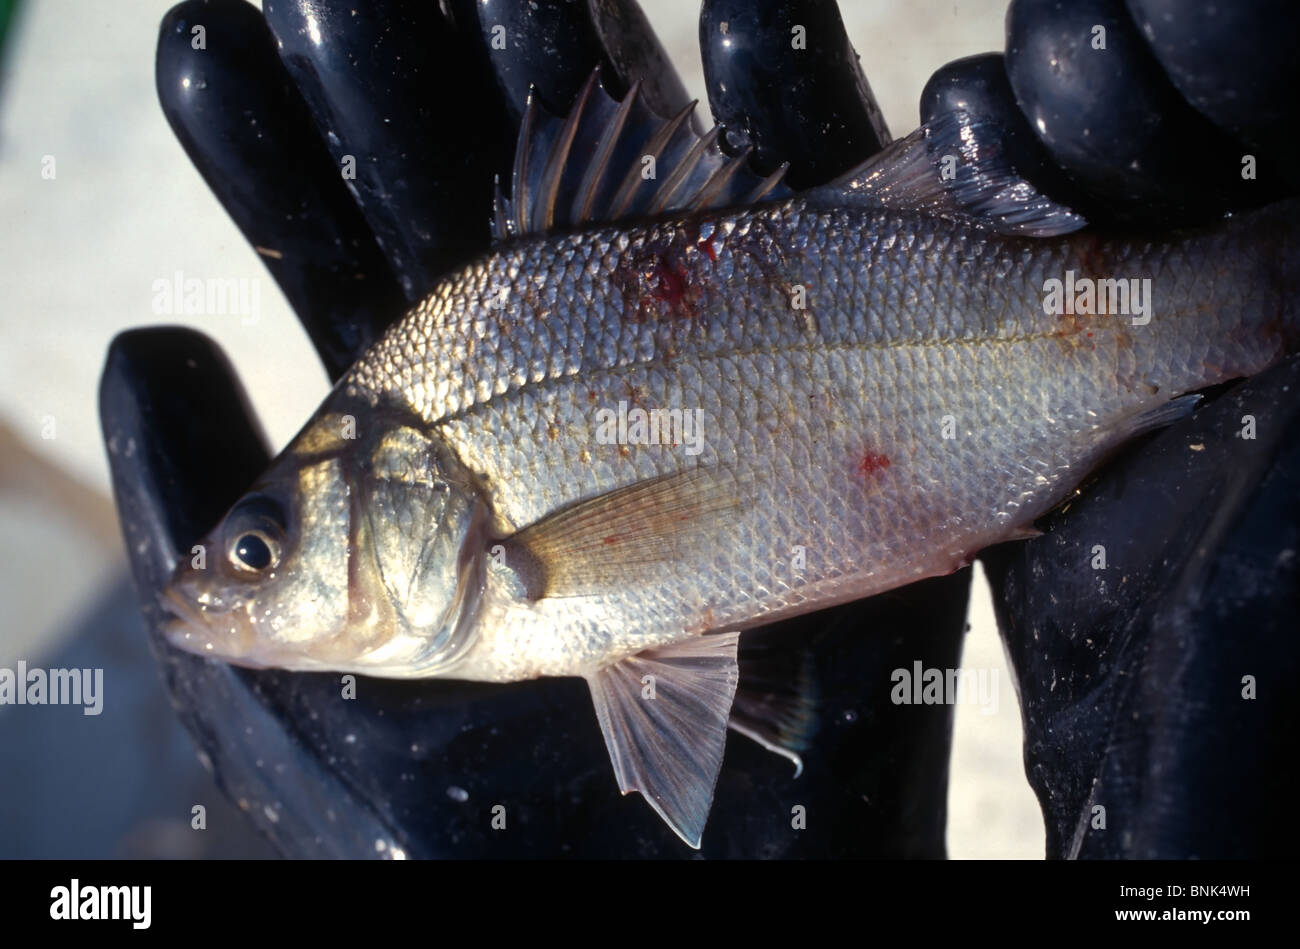 SHELLTOWN, MD, USA - 1997/09/25: A marine biologist holds a Menhaden fish with open sores from the flesh eating Pfiesteria disease outbreak in the Pocomoke River along the Chesapeake Bay September 25, 1997 in Shelltown, Maryland. The outbreak caused a loss of $43 million dollars in fishing revenue and is believed to be caused by the runoff of chicken manure from farms in the area. (Photo by Richard Ellis) Stock Photo